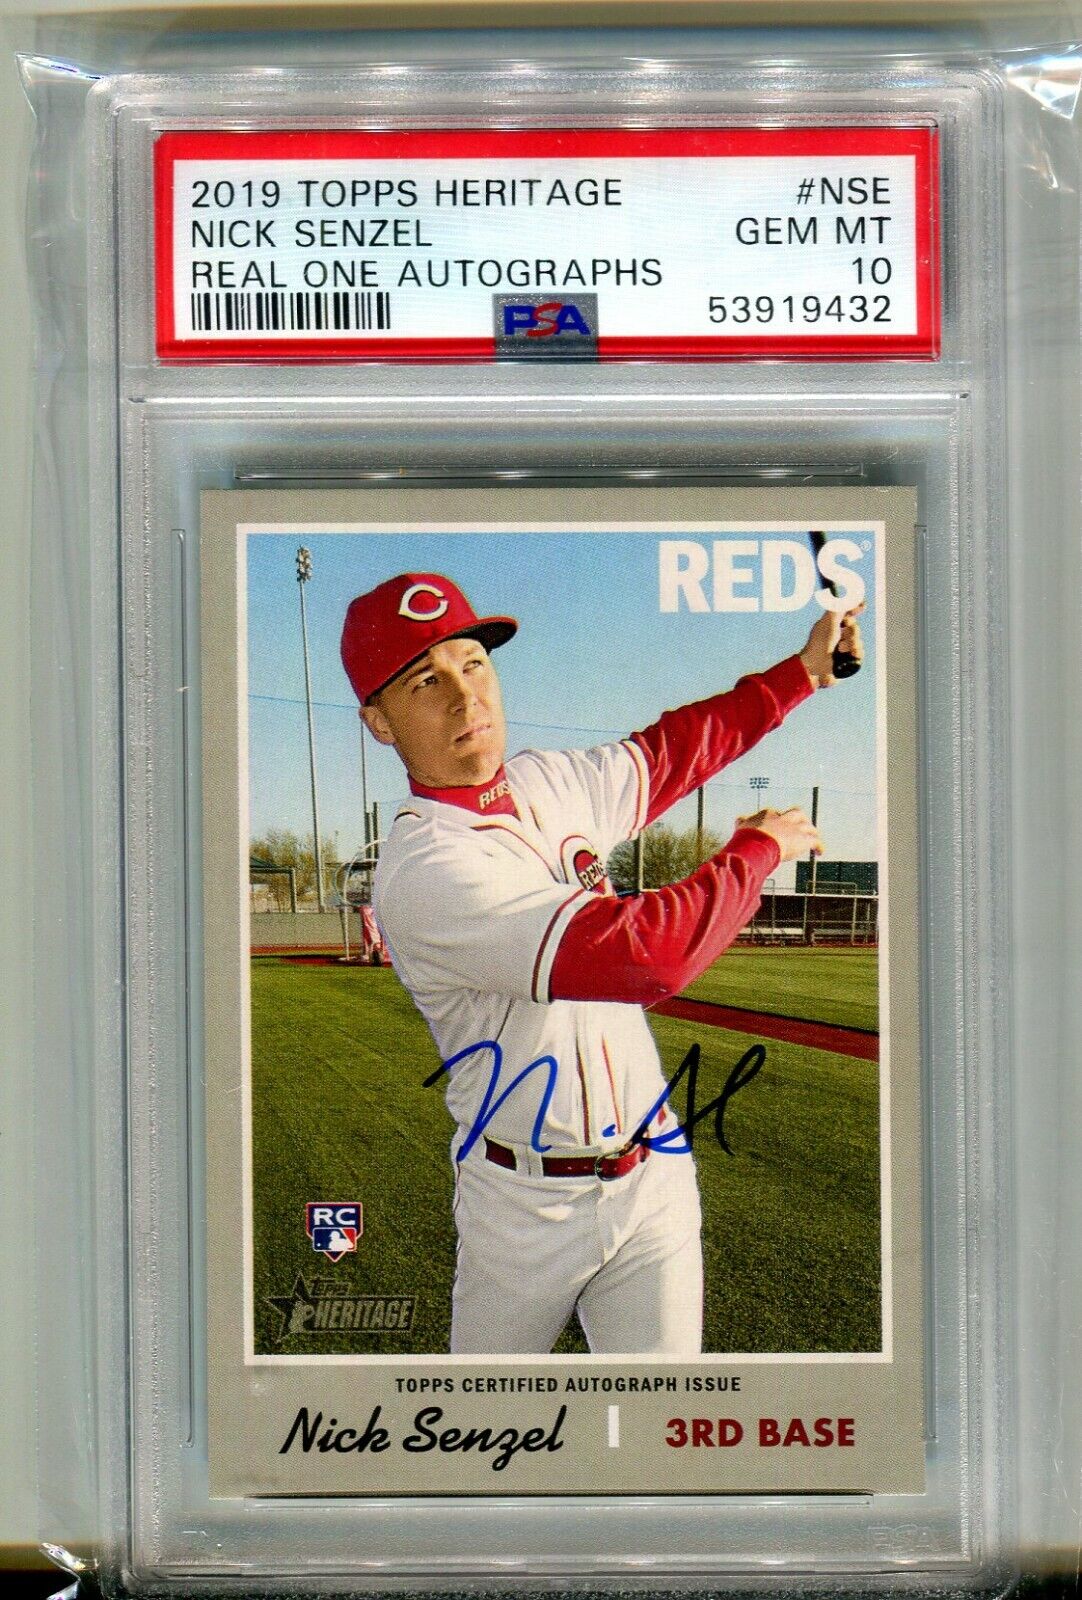 2019 Topps Heritage High # Nick Senzel Real One Auto Rookie PSA 10 Gem Mint Reds